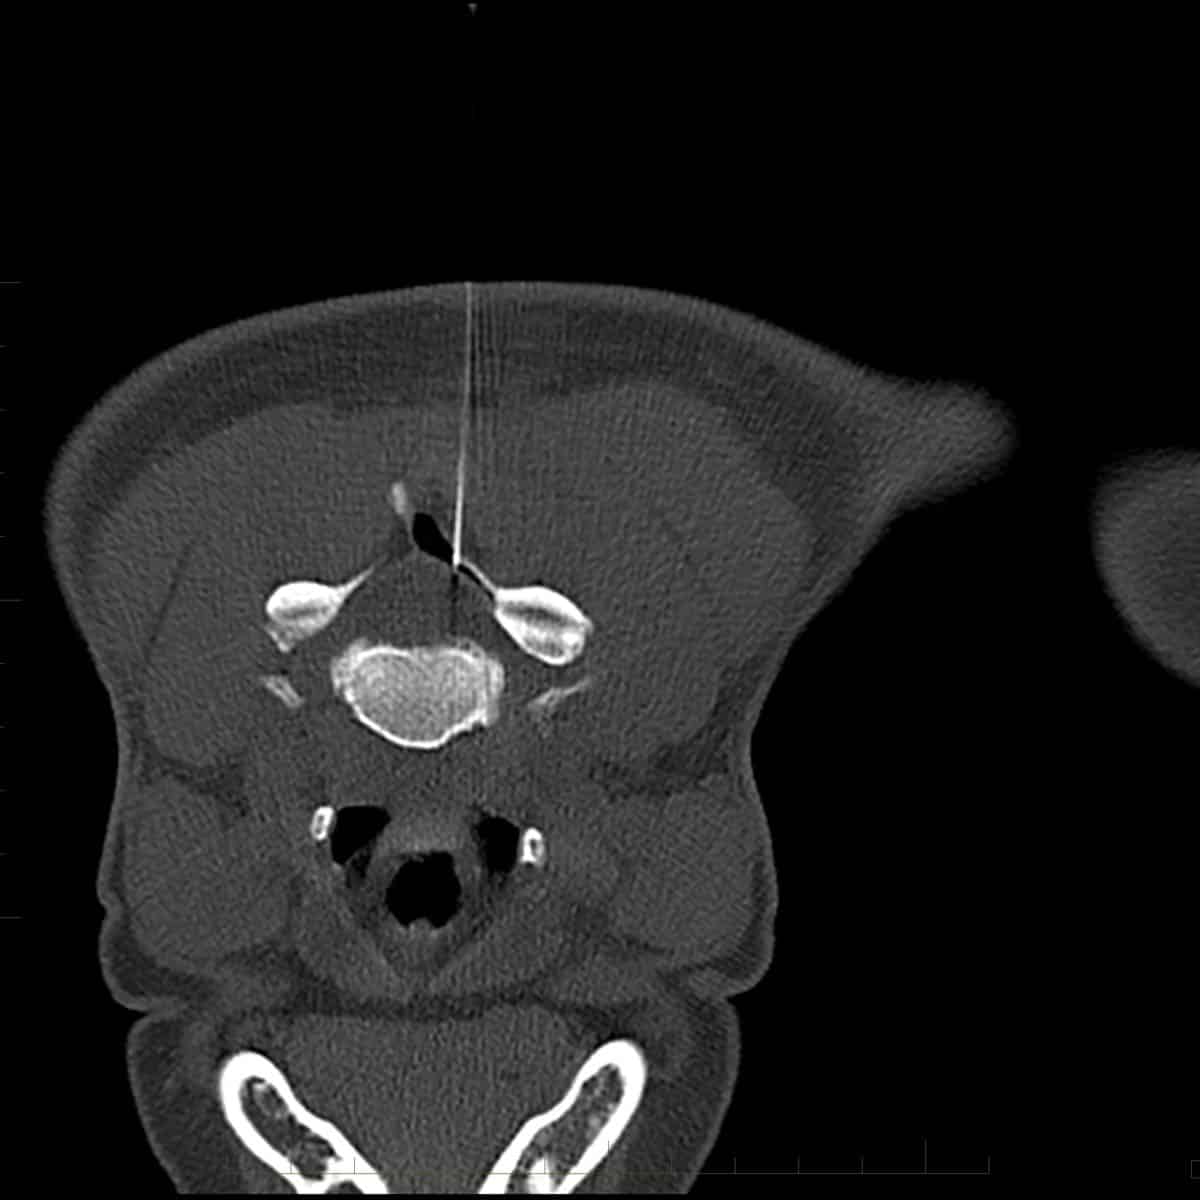 CT scan of a cervical epidural injection